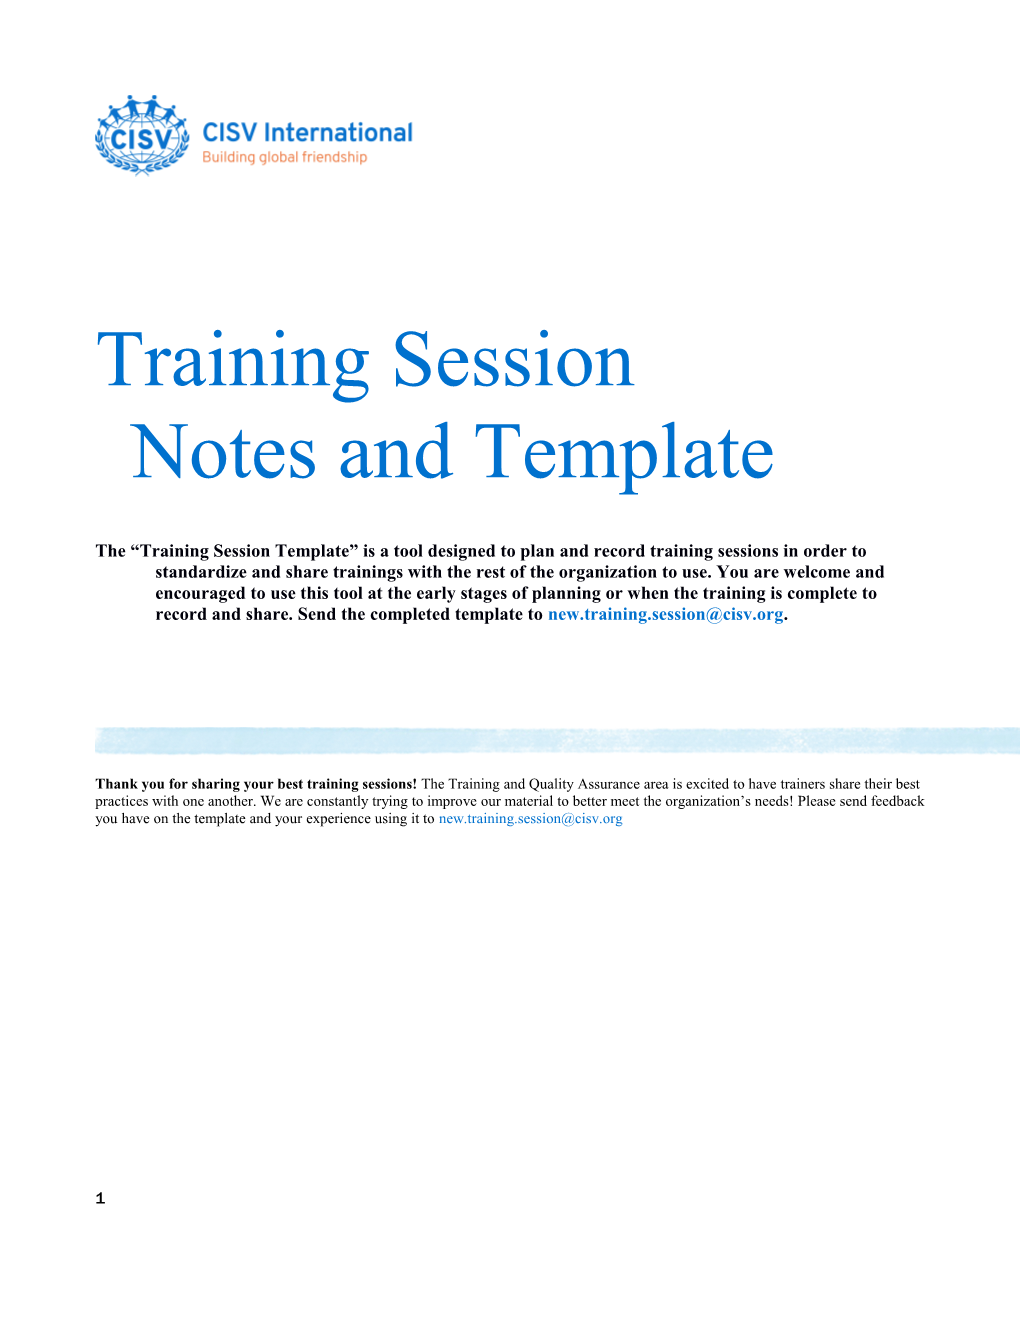 Training Session Notes and Template